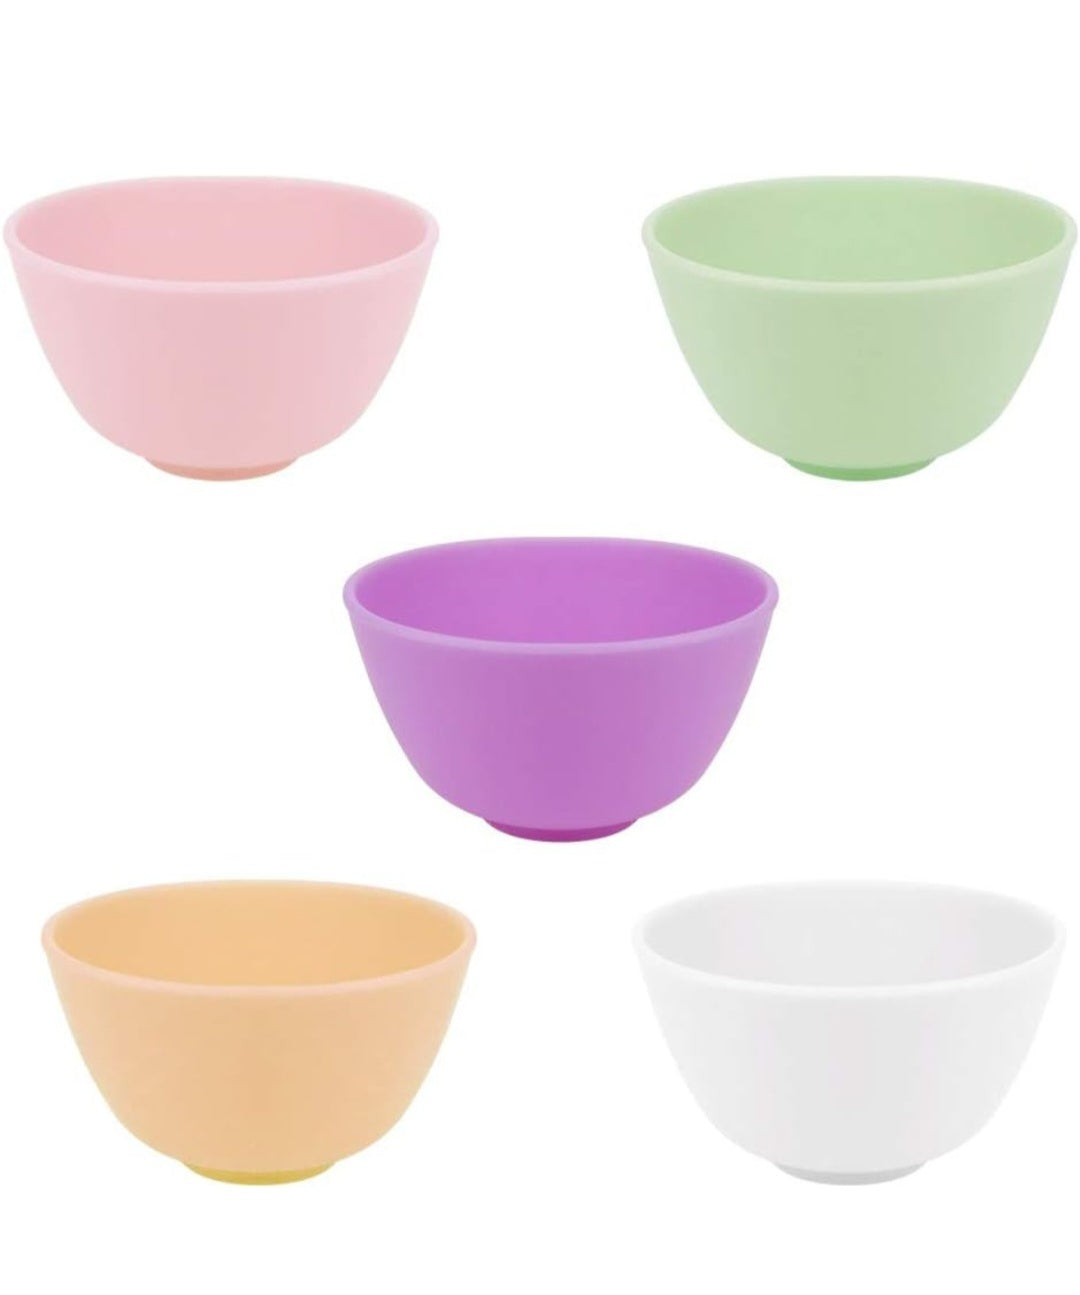 4 Inch Silicone Mixing Bowl for Facial Mask